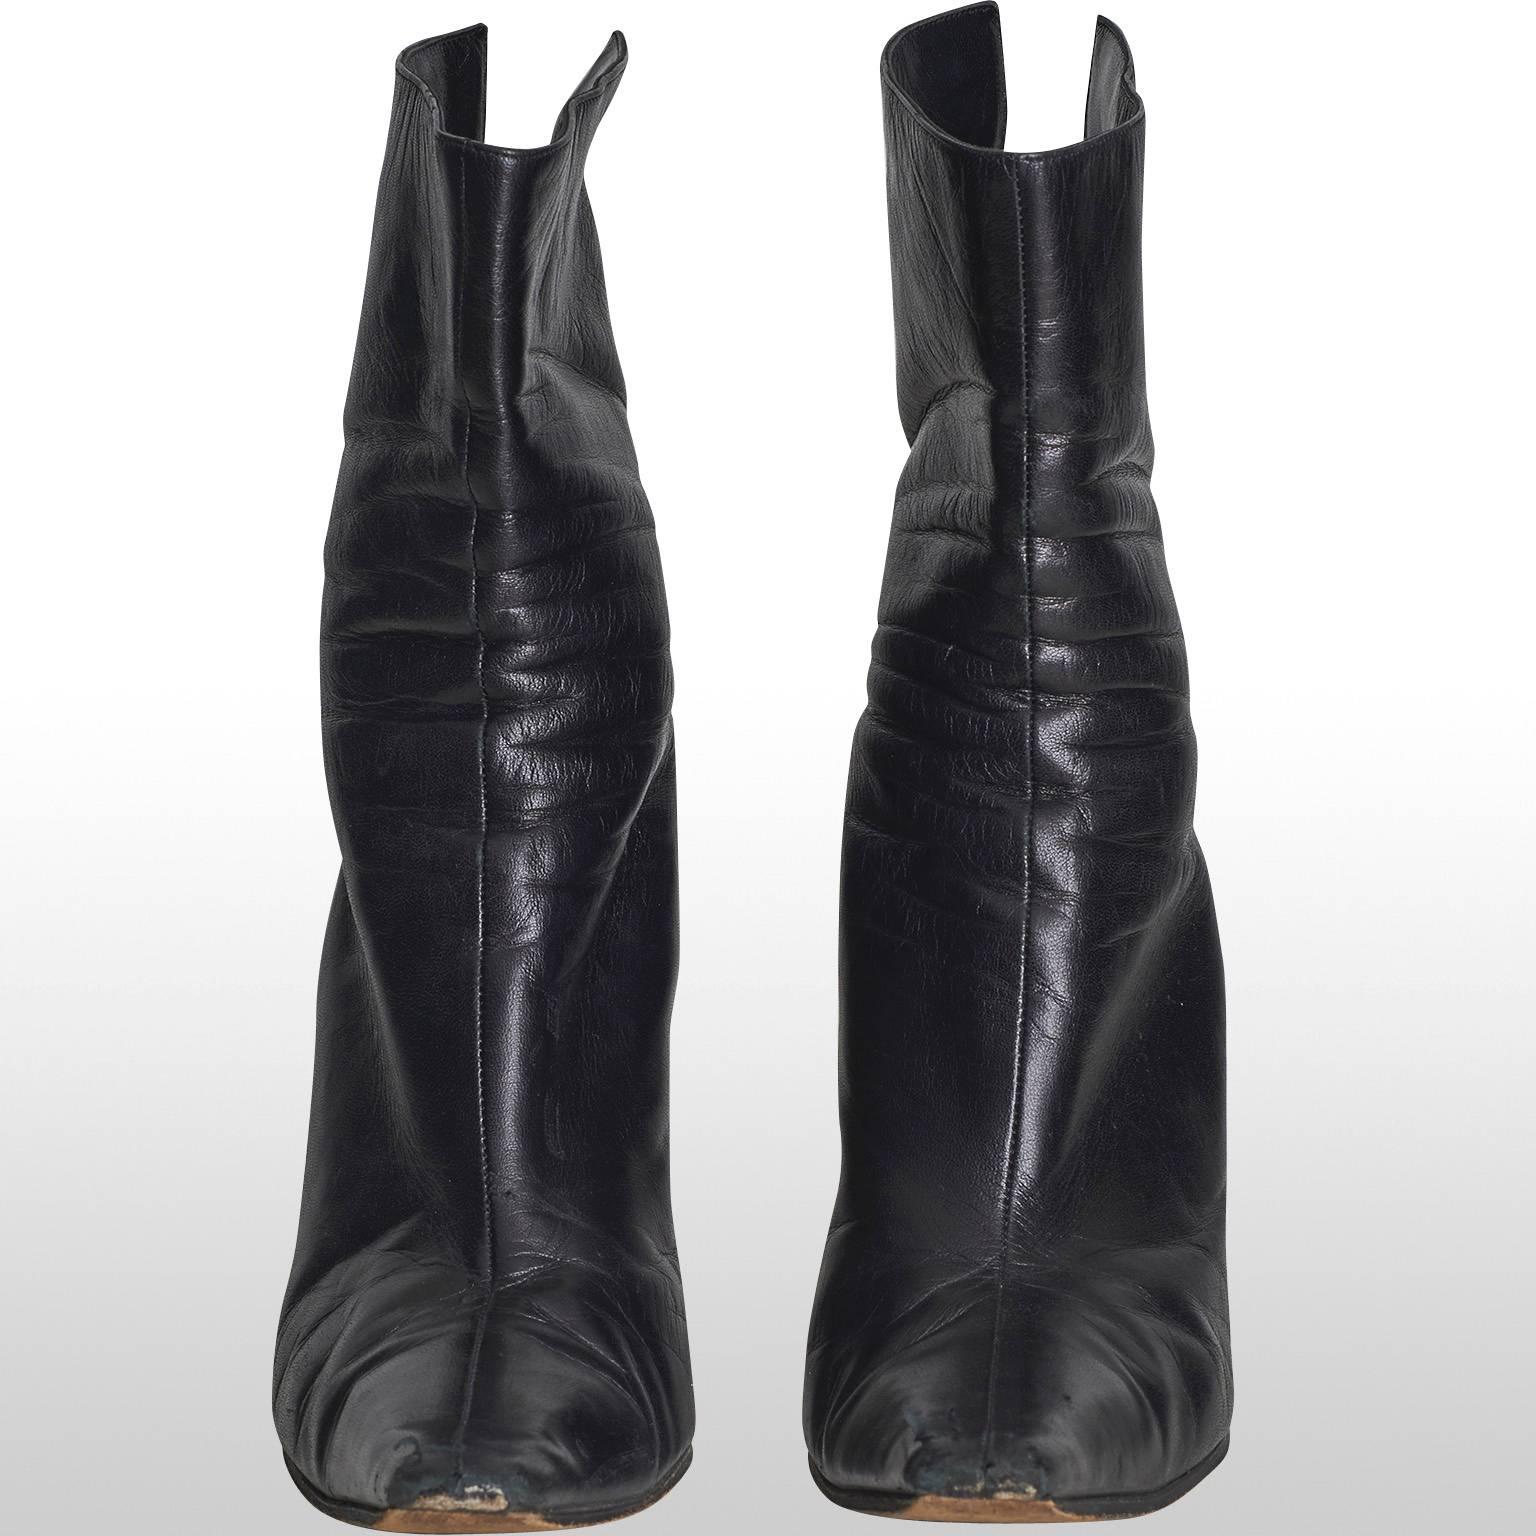 Chic black leather Jimmy Choo boots with small, thin heel. These boots sit comfortably just above the ankle, featuring a pointed toe and zip fastening at the back. Classic and smart, these boots can be pared with almost any outfit from jeans to